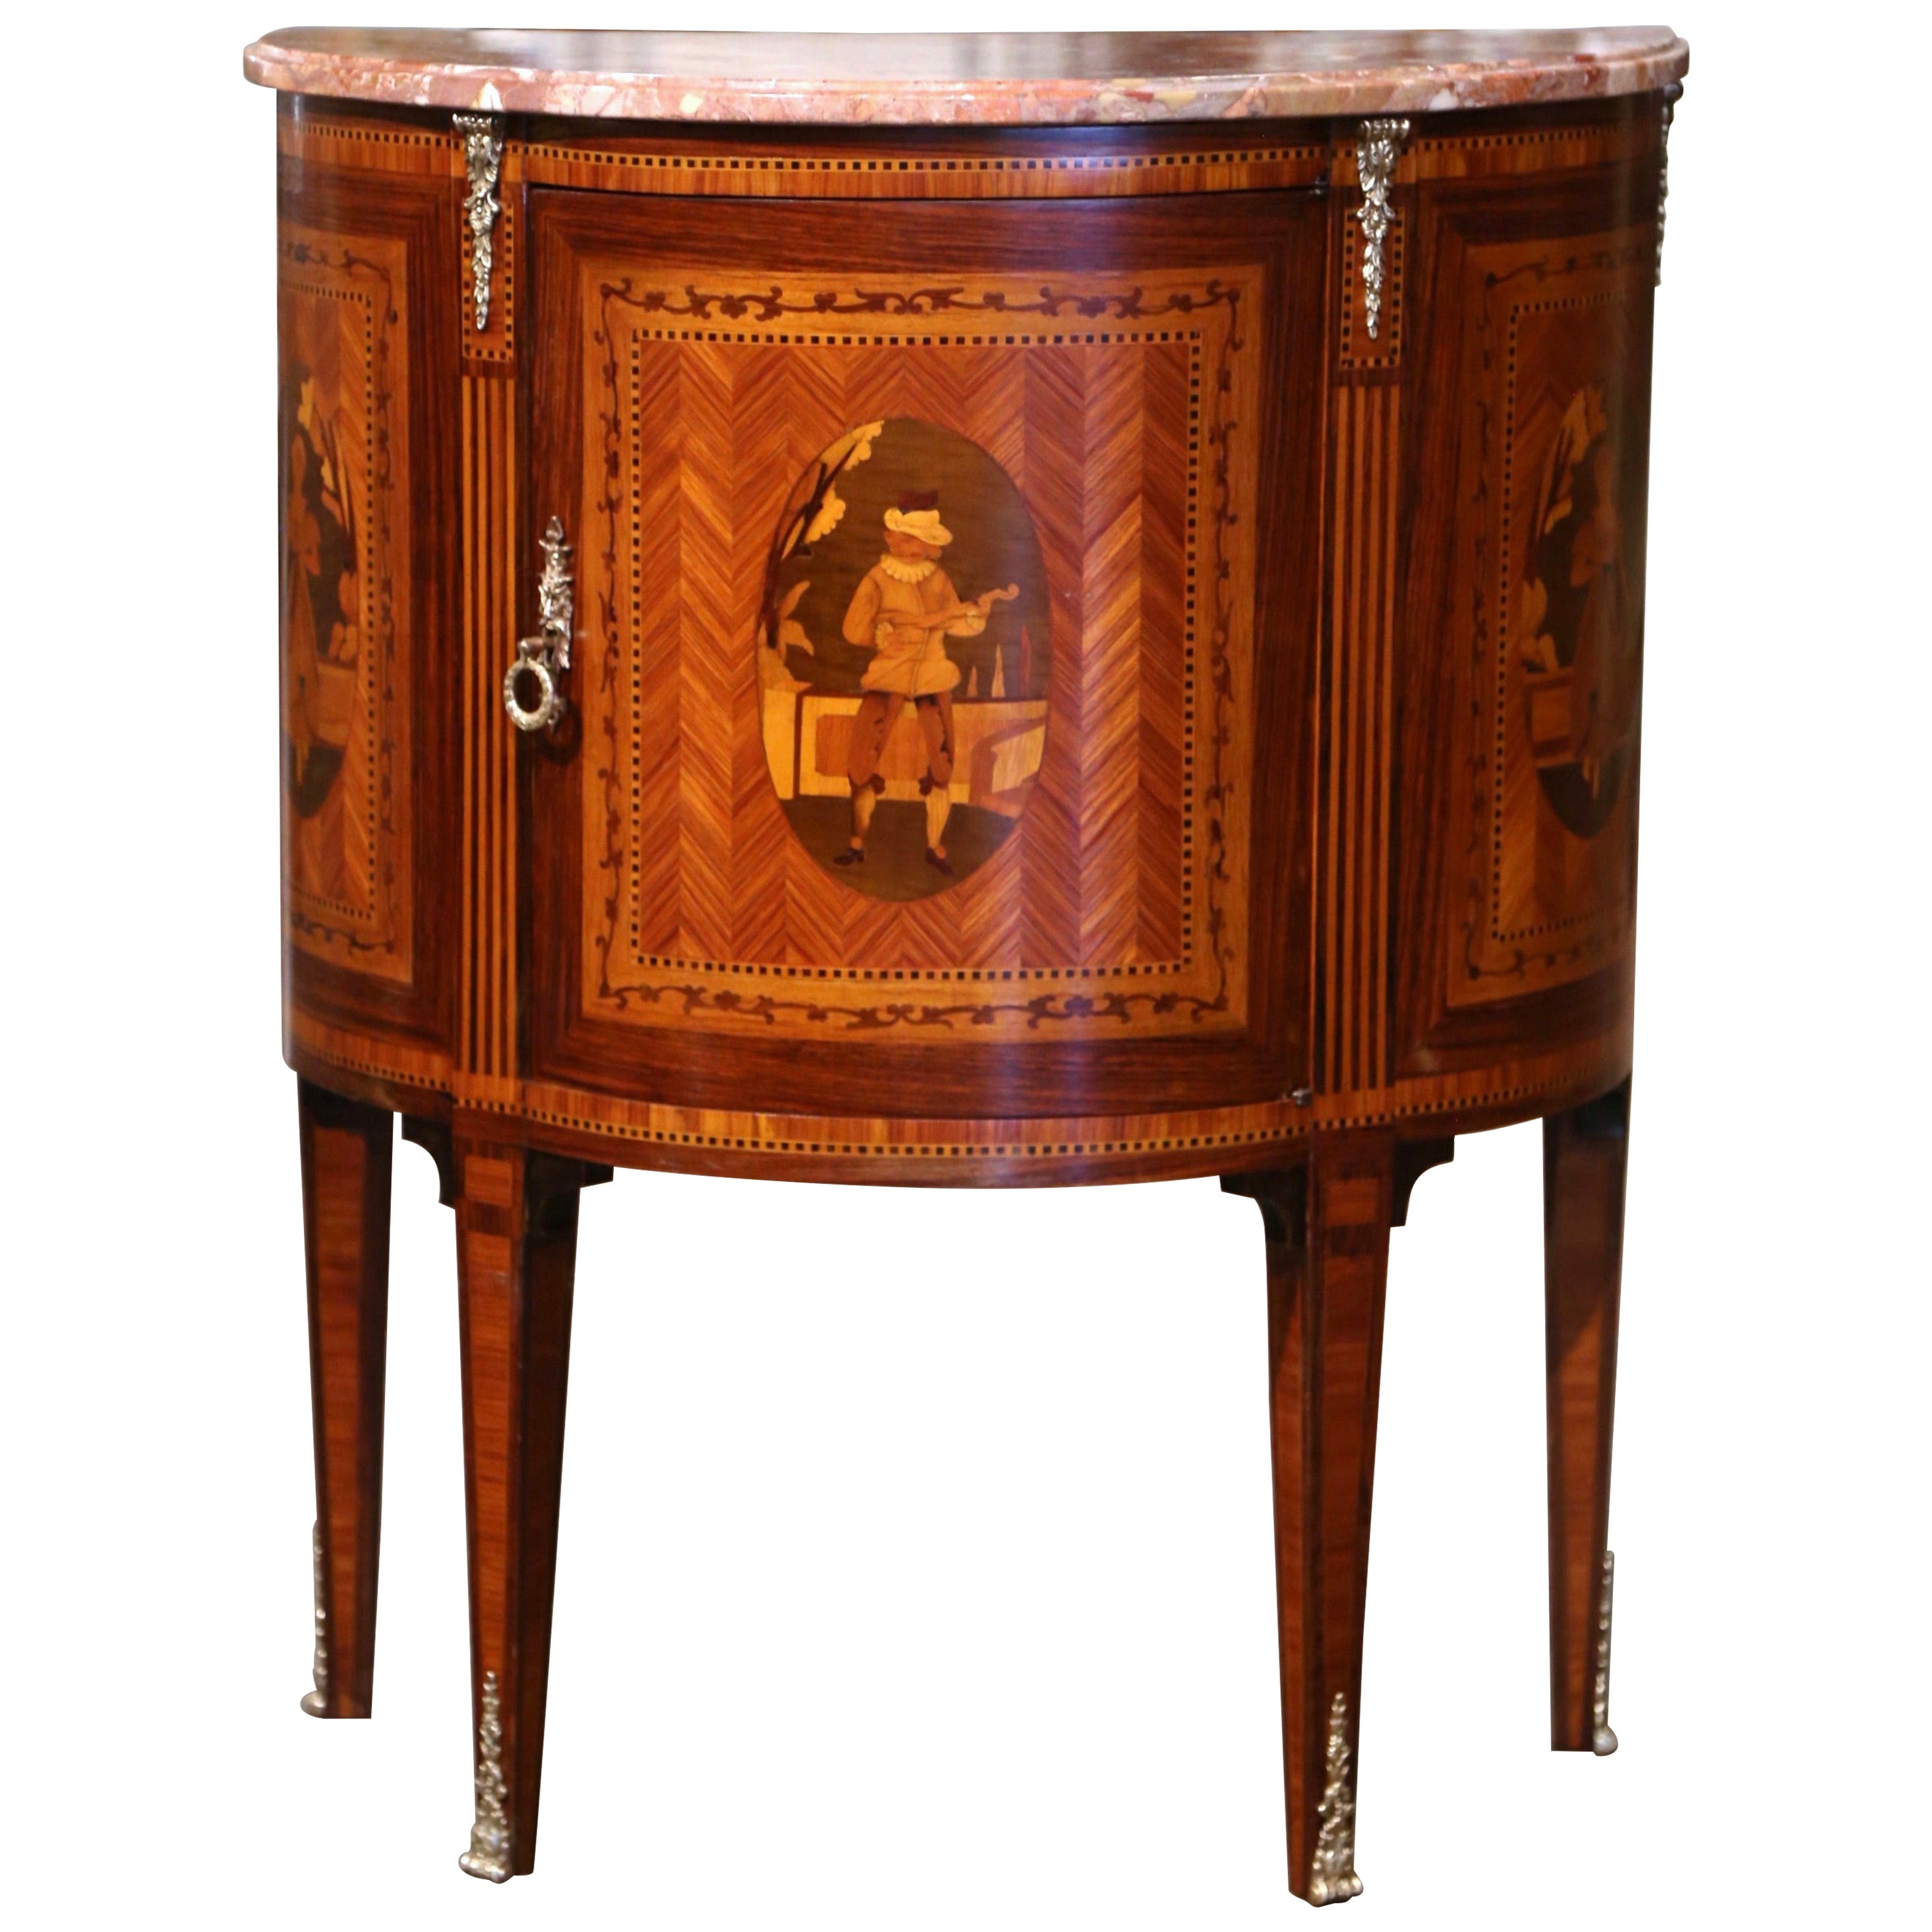 19th Century French Louis XVI Marble Top Walnut Marquetry Demi-Lune Cabinet 